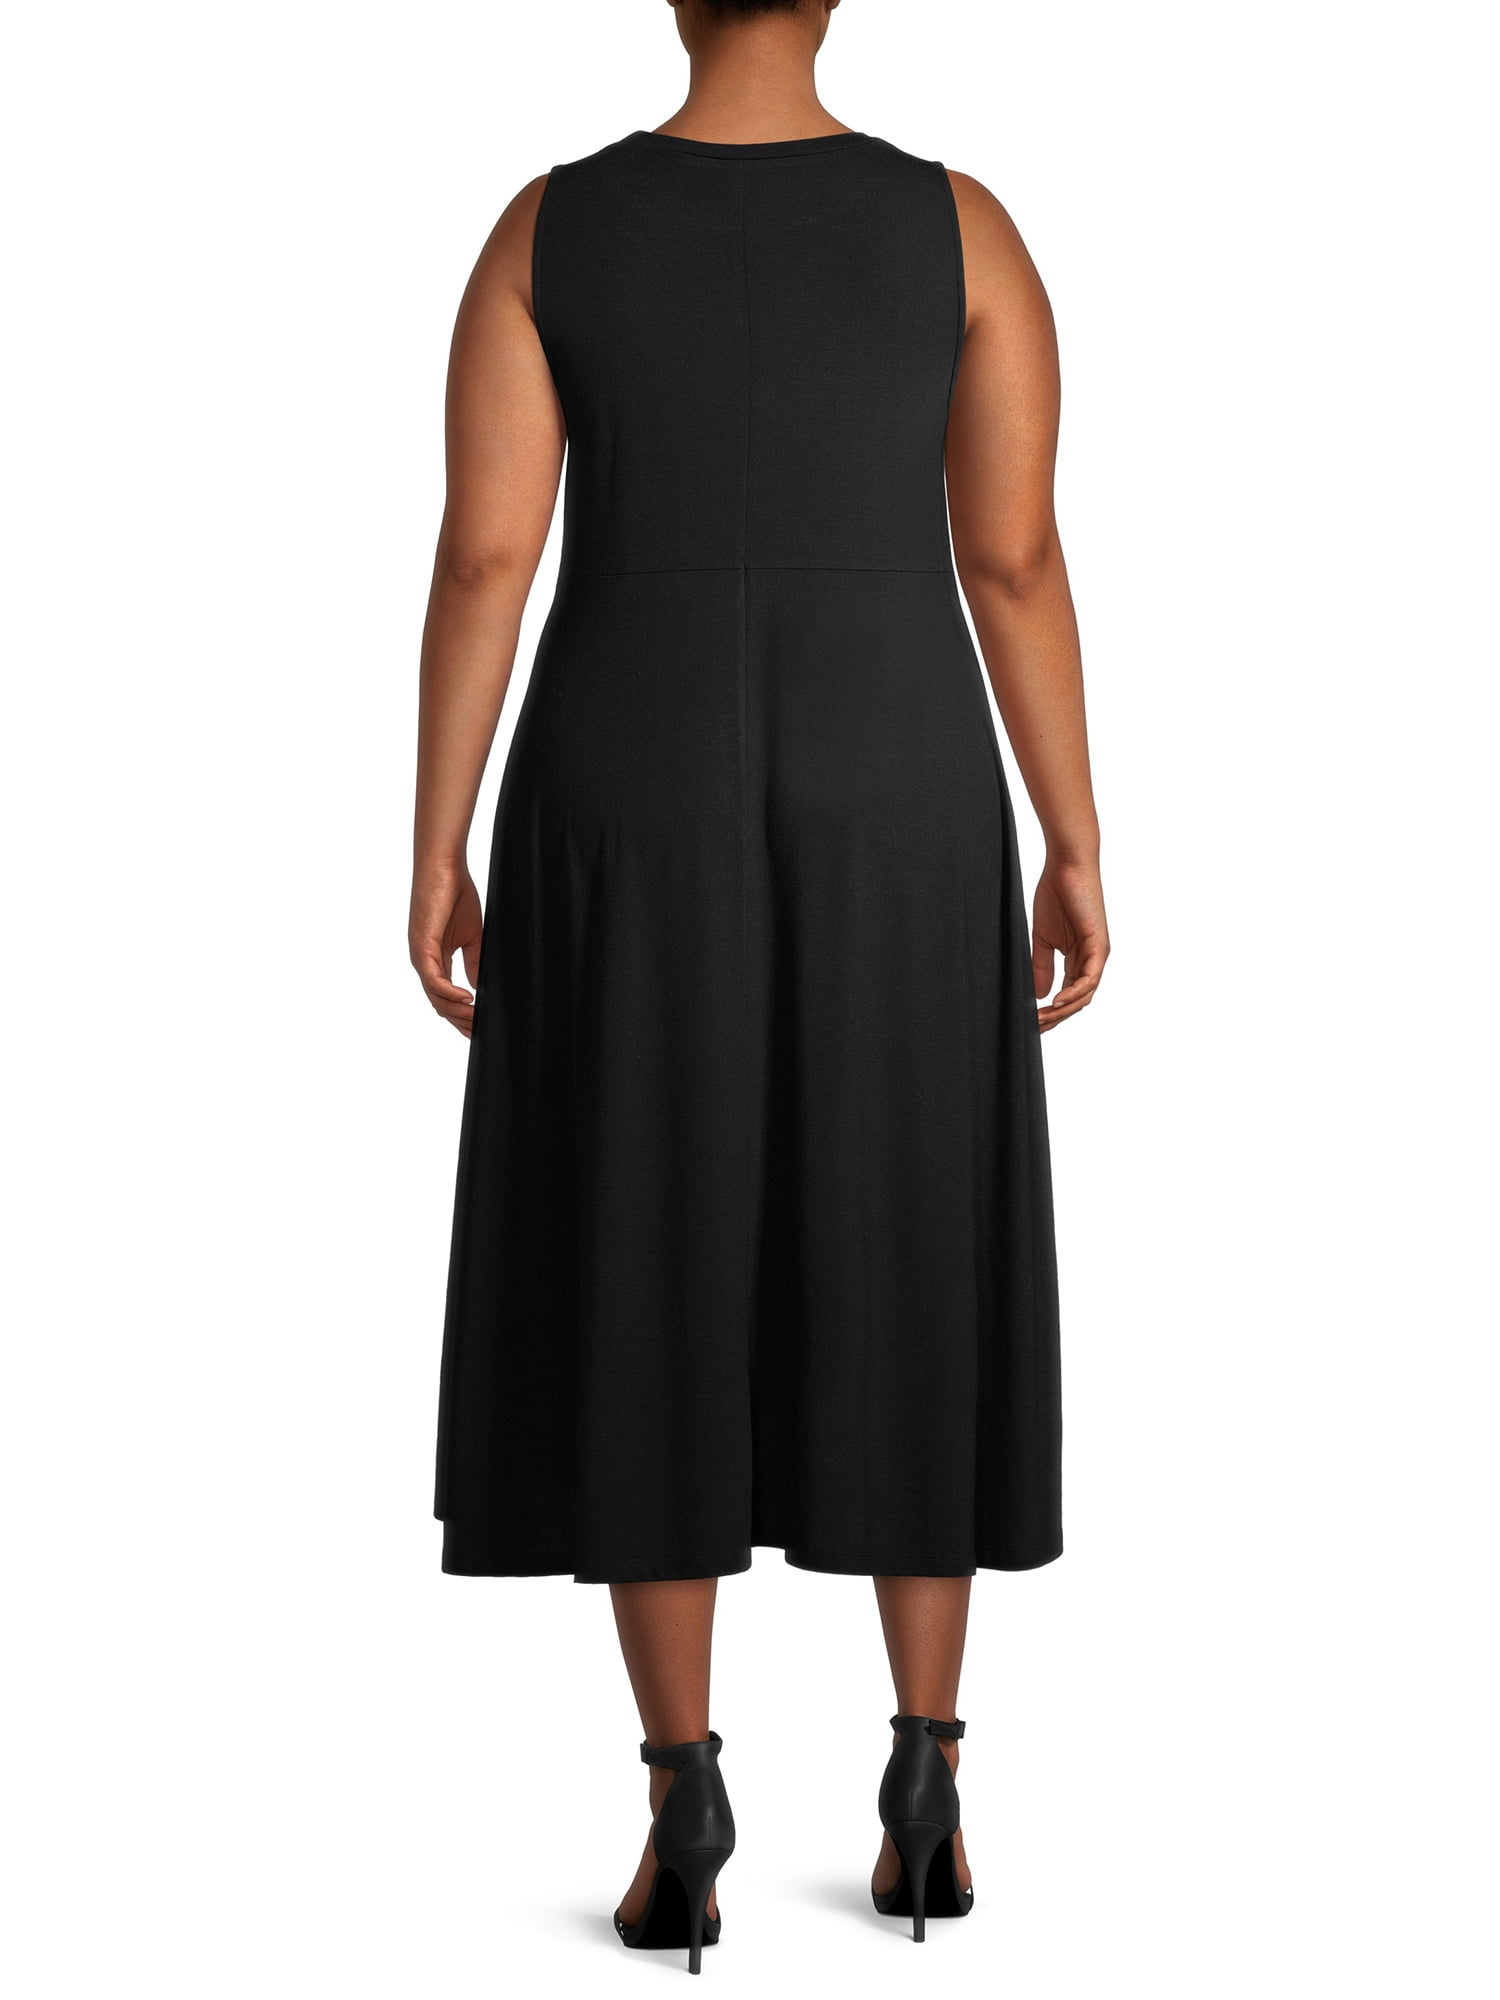 Gray by Grayson Social Women's Plus Size Ruched Jersey Dress 